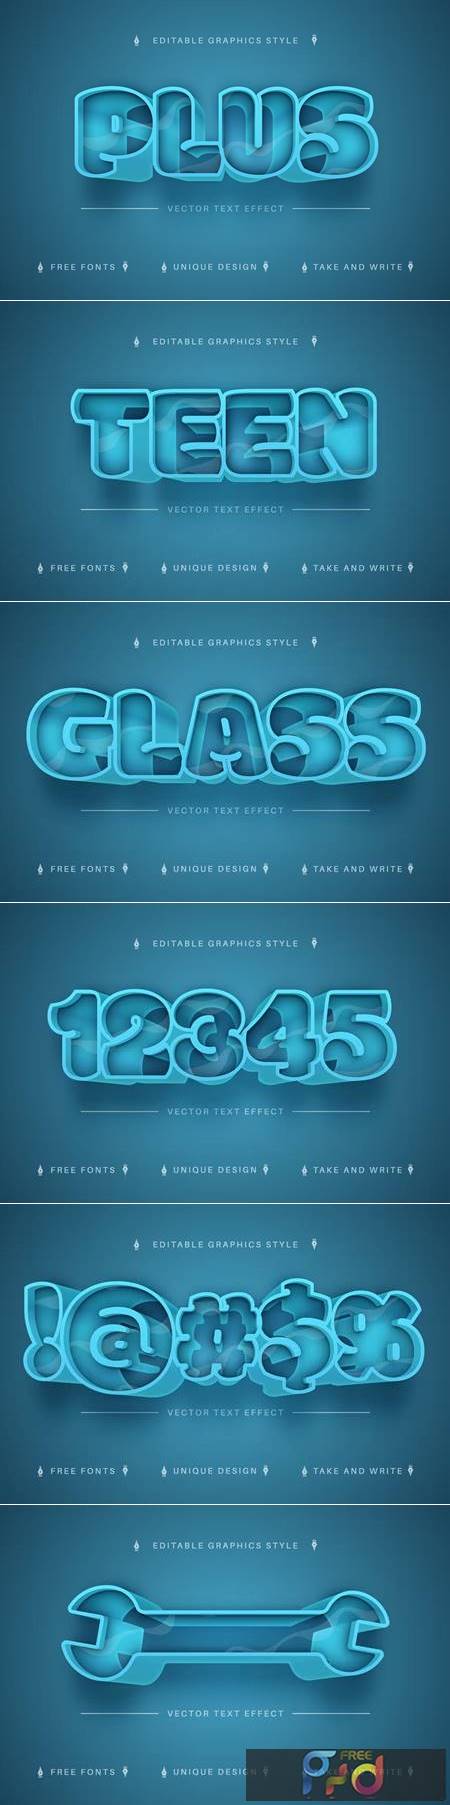 Blue Glass - Editable Text Effect, Font Style 3PG7F8S 1